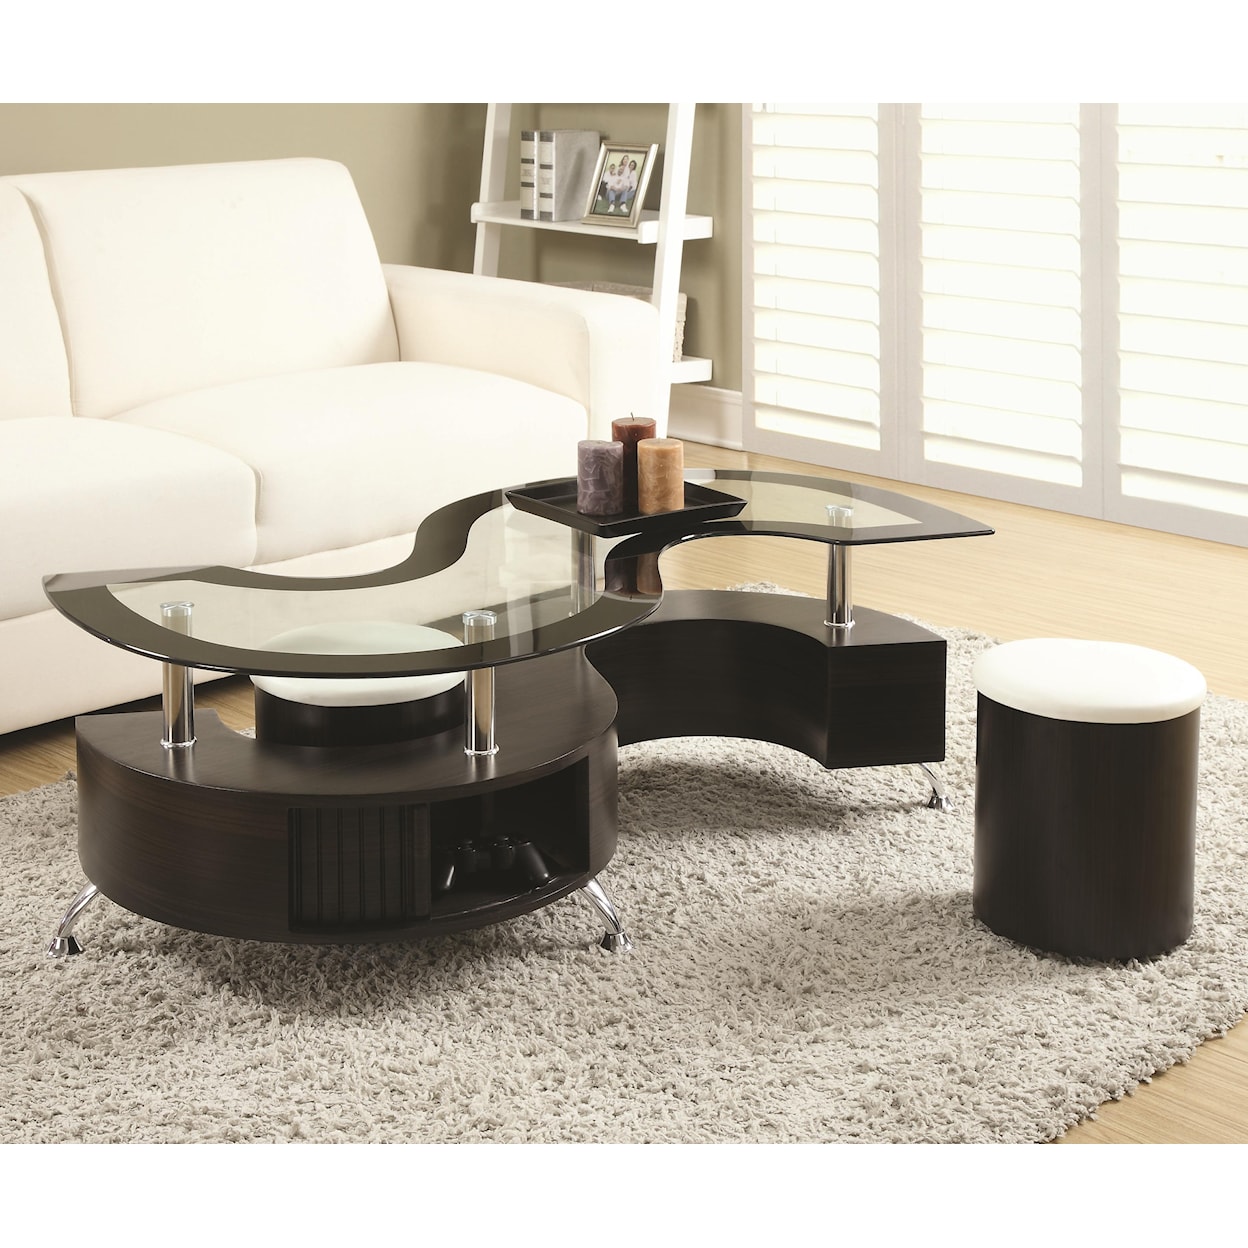 Michael Alan CSR Select White S Shaped Coffee Table w/ 2 Stools Coffee Table and Stools